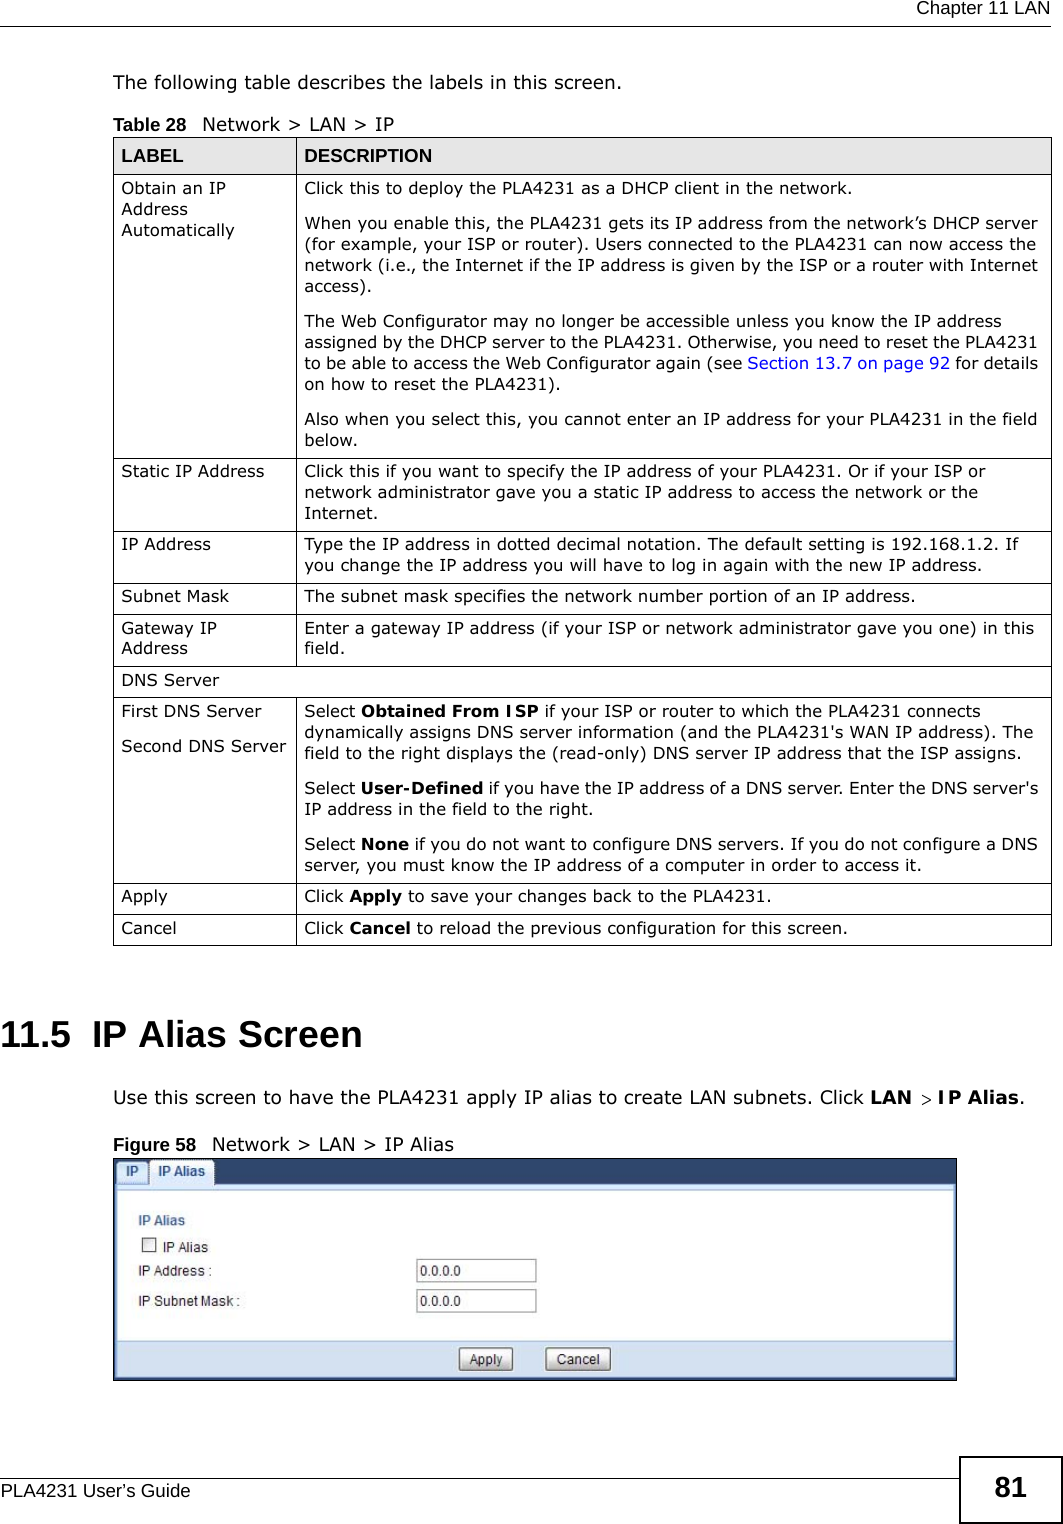  Chapter 11 LANPLA4231 User’s Guide 81The following table describes the labels in this screen.11.5  IP Alias ScreenUse this screen to have the PLA4231 apply IP alias to create LAN subnets. Click LAN &gt; IP Alias.Figure 58   Network &gt; LAN &gt; IP Alias Table 28   Network &gt; LAN &gt; IPLABEL DESCRIPTIONObtain an IP Address AutomaticallyClick this to deploy the PLA4231 as a DHCP client in the network. When you enable this, the PLA4231 gets its IP address from the network’s DHCP server (for example, your ISP or router). Users connected to the PLA4231 can now access the network (i.e., the Internet if the IP address is given by the ISP or a router with Internet access).The Web Configurator may no longer be accessible unless you know the IP address assigned by the DHCP server to the PLA4231. Otherwise, you need to reset the PLA4231 to be able to access the Web Configurator again (see Section 13.7 on page 92 for details on how to reset the PLA4231).Also when you select this, you cannot enter an IP address for your PLA4231 in the field below.Static IP Address  Click this if you want to specify the IP address of your PLA4231. Or if your ISP or network administrator gave you a static IP address to access the network or the Internet.IP Address Type the IP address in dotted decimal notation. The default setting is 192.168.1.2. If you change the IP address you will have to log in again with the new IP address.   Subnet Mask The subnet mask specifies the network number portion of an IP address. Gateway IP AddressEnter a gateway IP address (if your ISP or network administrator gave you one) in this field.DNS ServerFirst DNS ServerSecond DNS ServerSelect Obtained From ISP if your ISP or router to which the PLA4231 connects dynamically assigns DNS server information (and the PLA4231&apos;s WAN IP address). The field to the right displays the (read-only) DNS server IP address that the ISP assigns. Select User-Defined if you have the IP address of a DNS server. Enter the DNS server&apos;s IP address in the field to the right. Select None if you do not want to configure DNS servers. If you do not configure a DNS server, you must know the IP address of a computer in order to access it.Apply Click Apply to save your changes back to the PLA4231.Cancel Click Cancel to reload the previous configuration for this screen.